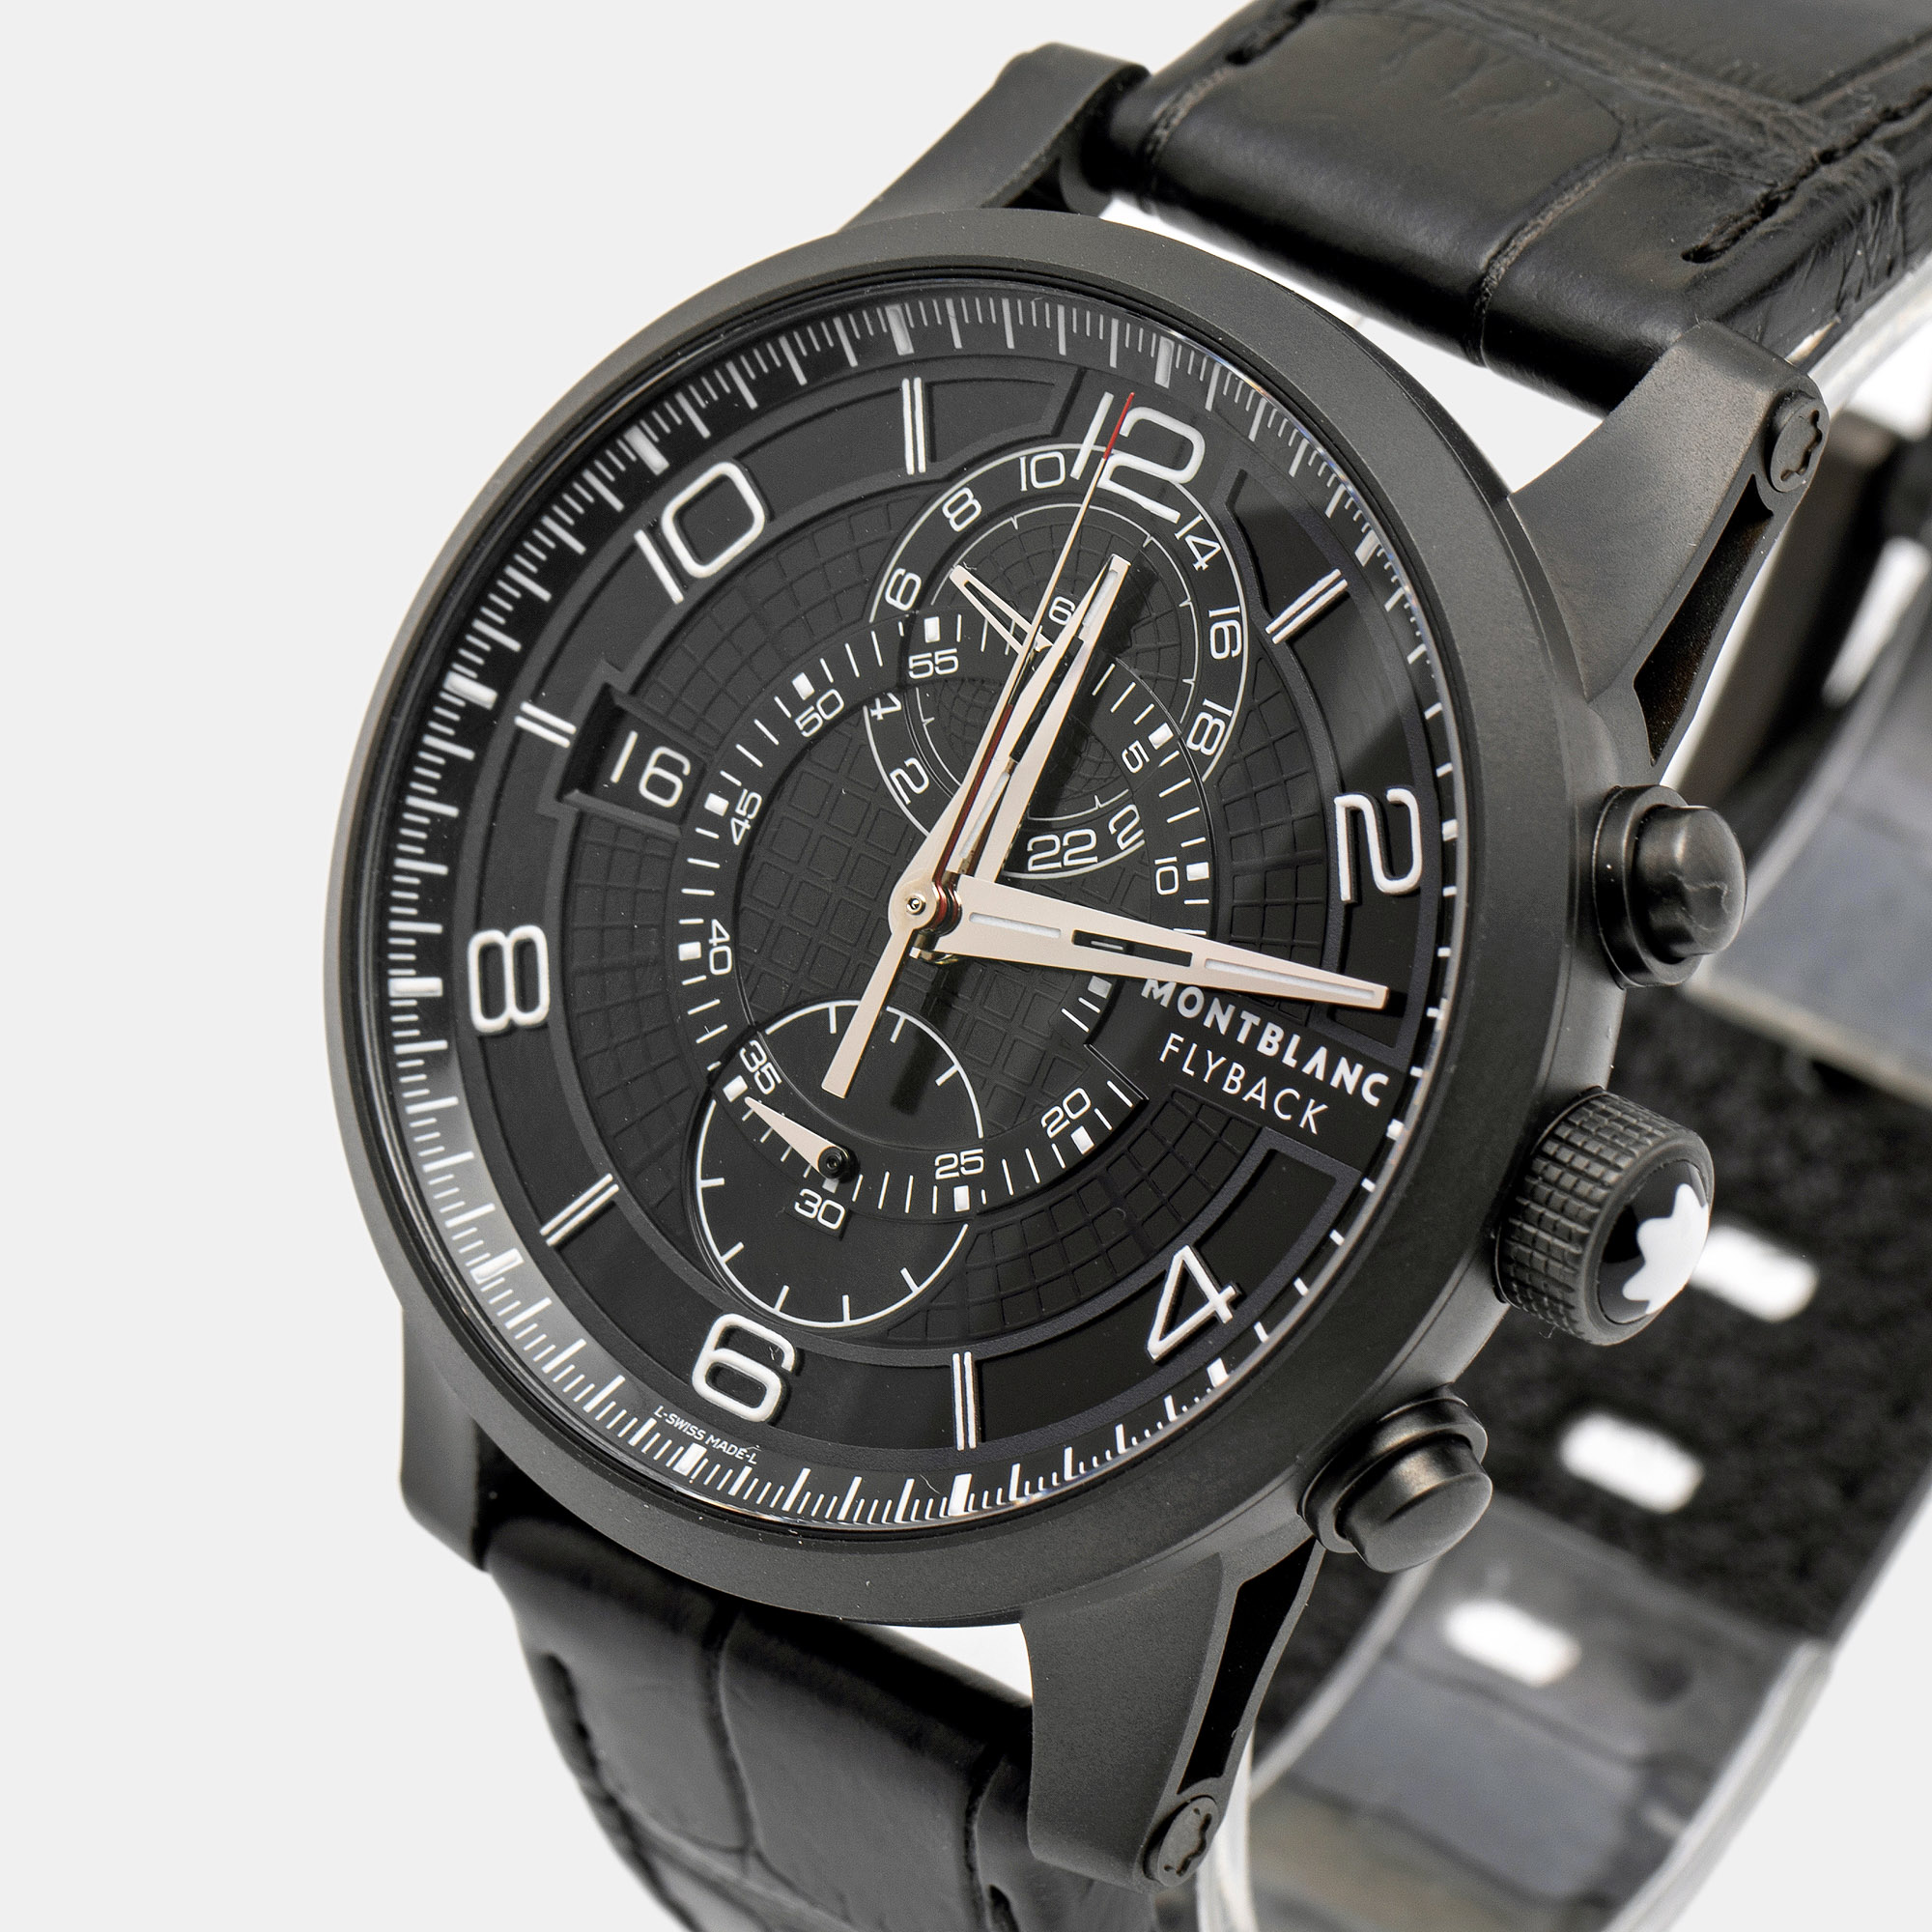 

Montblanc Black PVD Coated Titanium Leather Timewalker Twinfly